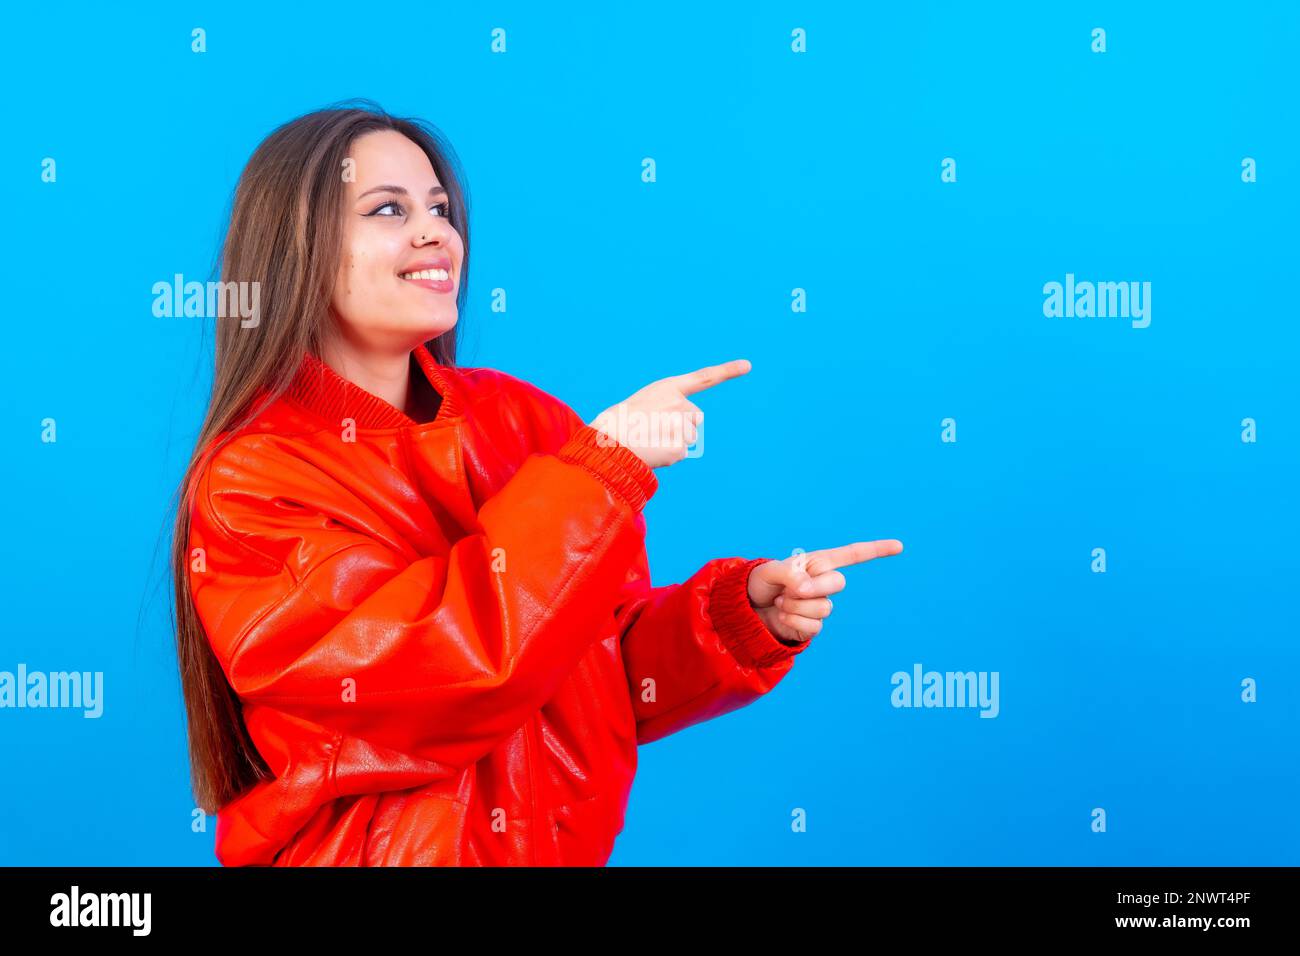 Attractive woman smiling pointing fingers at copy space on blue background, red jacket very cheerful Stock Photo